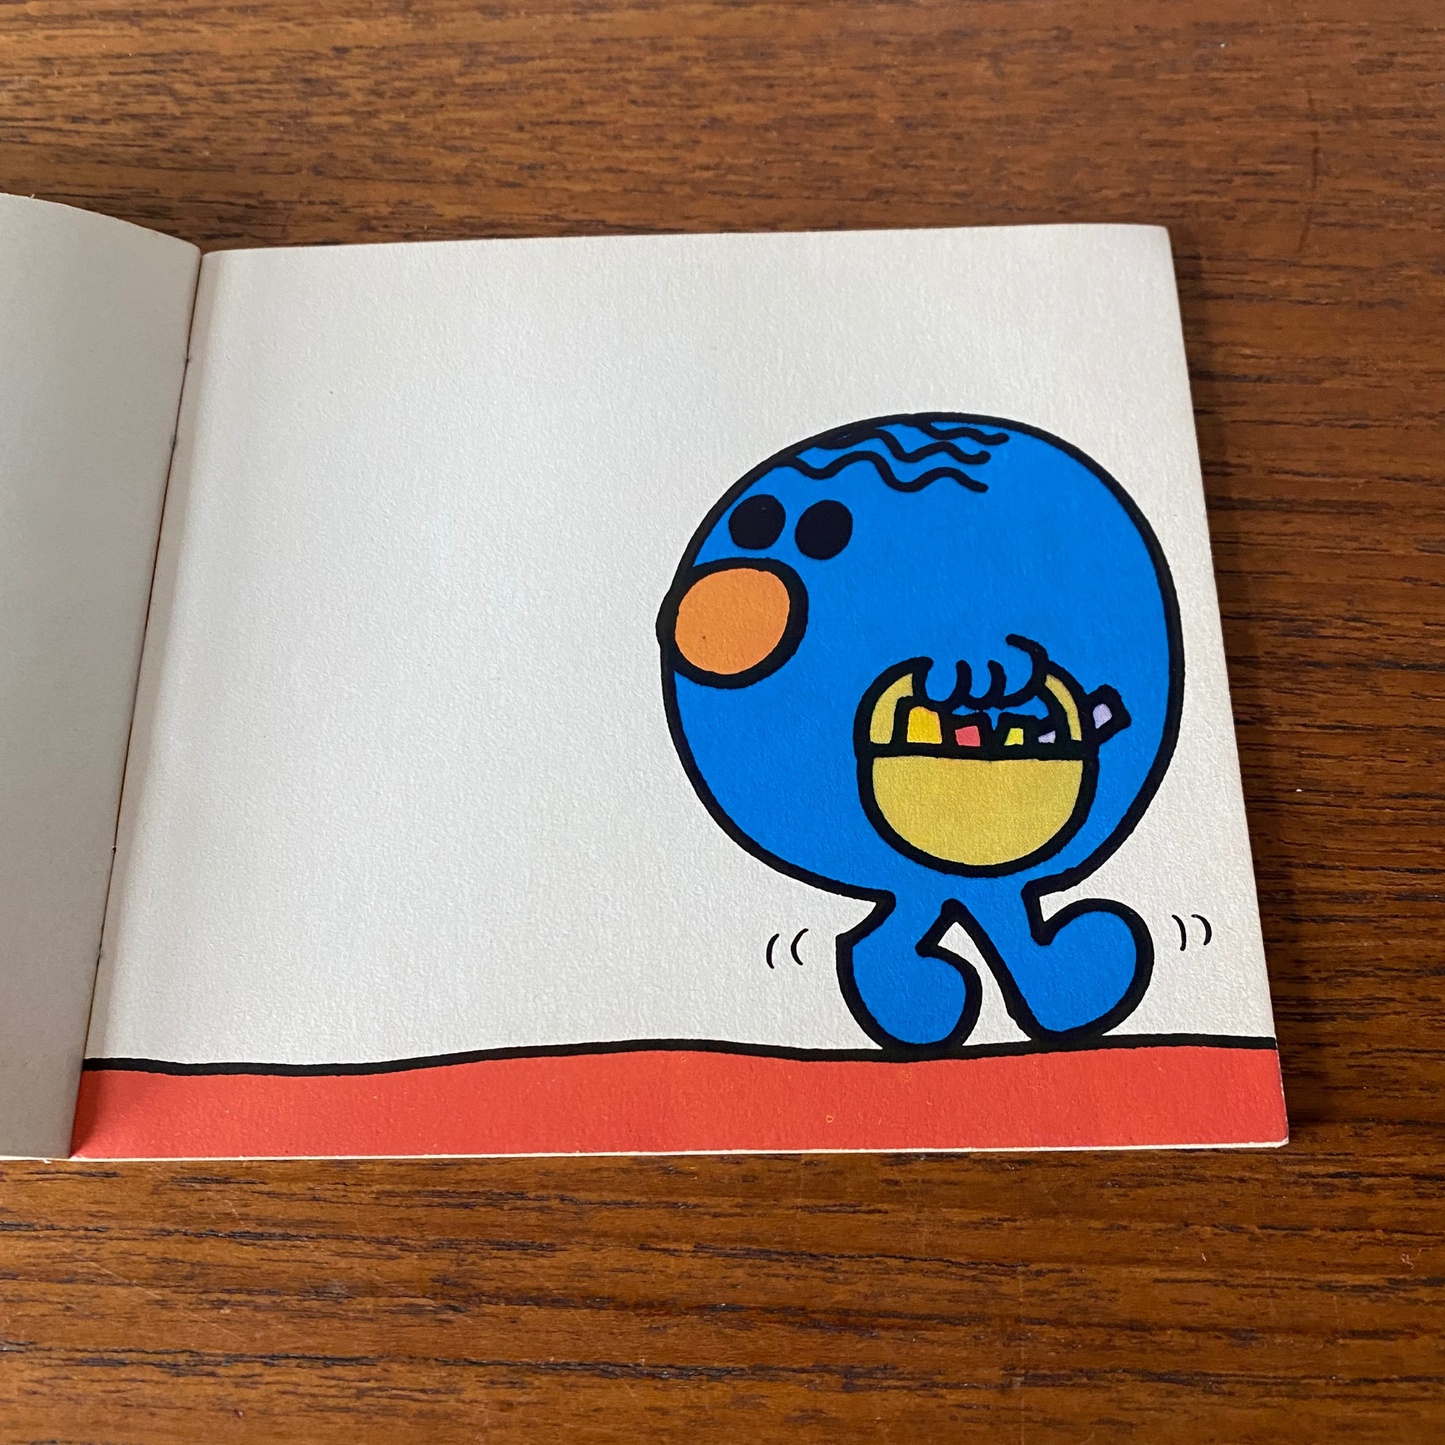 Collectible  Mr Worry   book  - Original 1970s Roger Hargreaves Edition